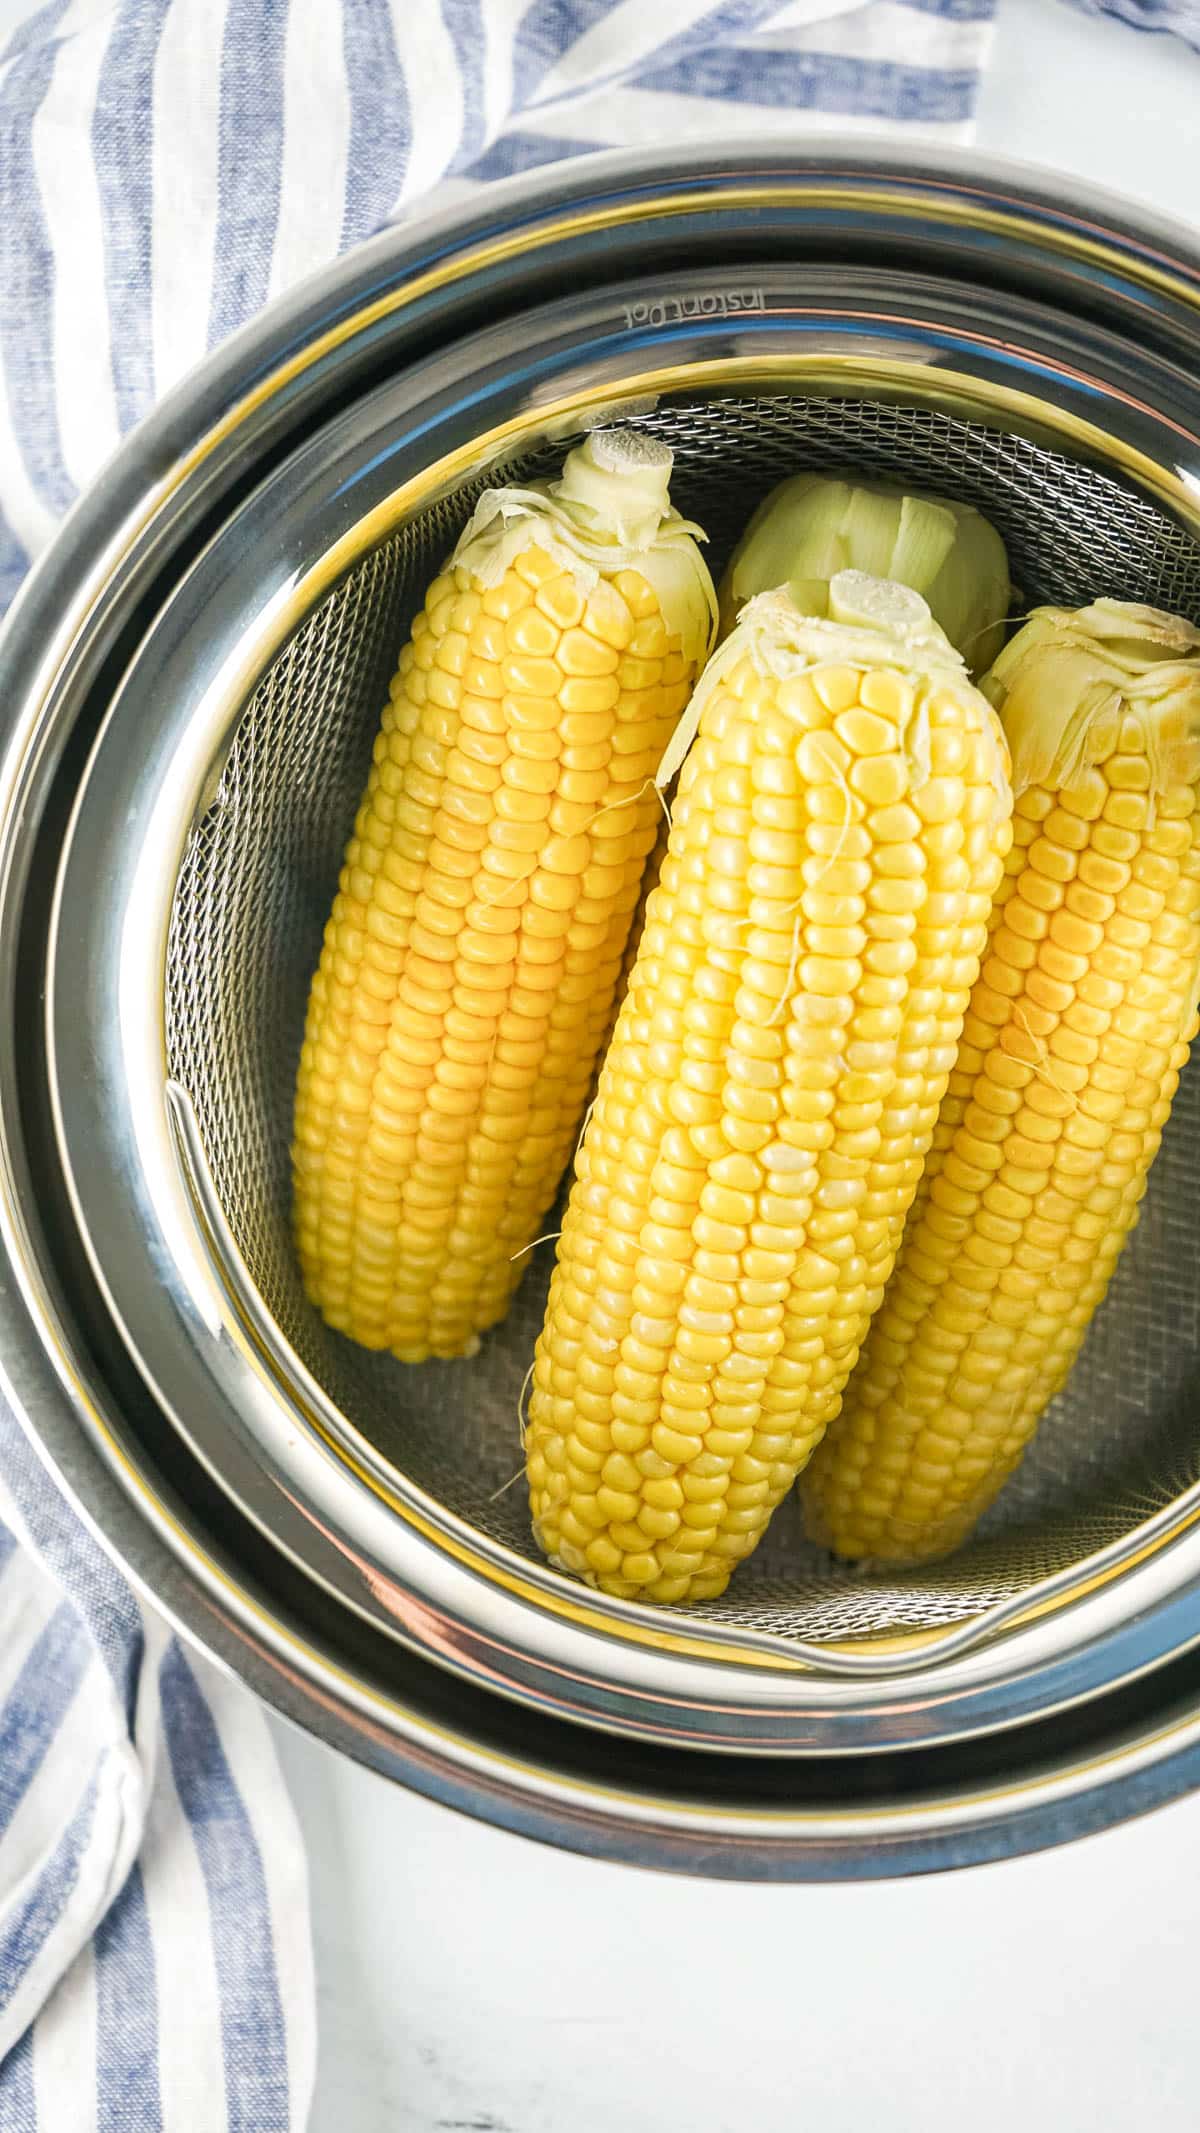 Ears of corn stacked inside a steamer basket in the instant pot.